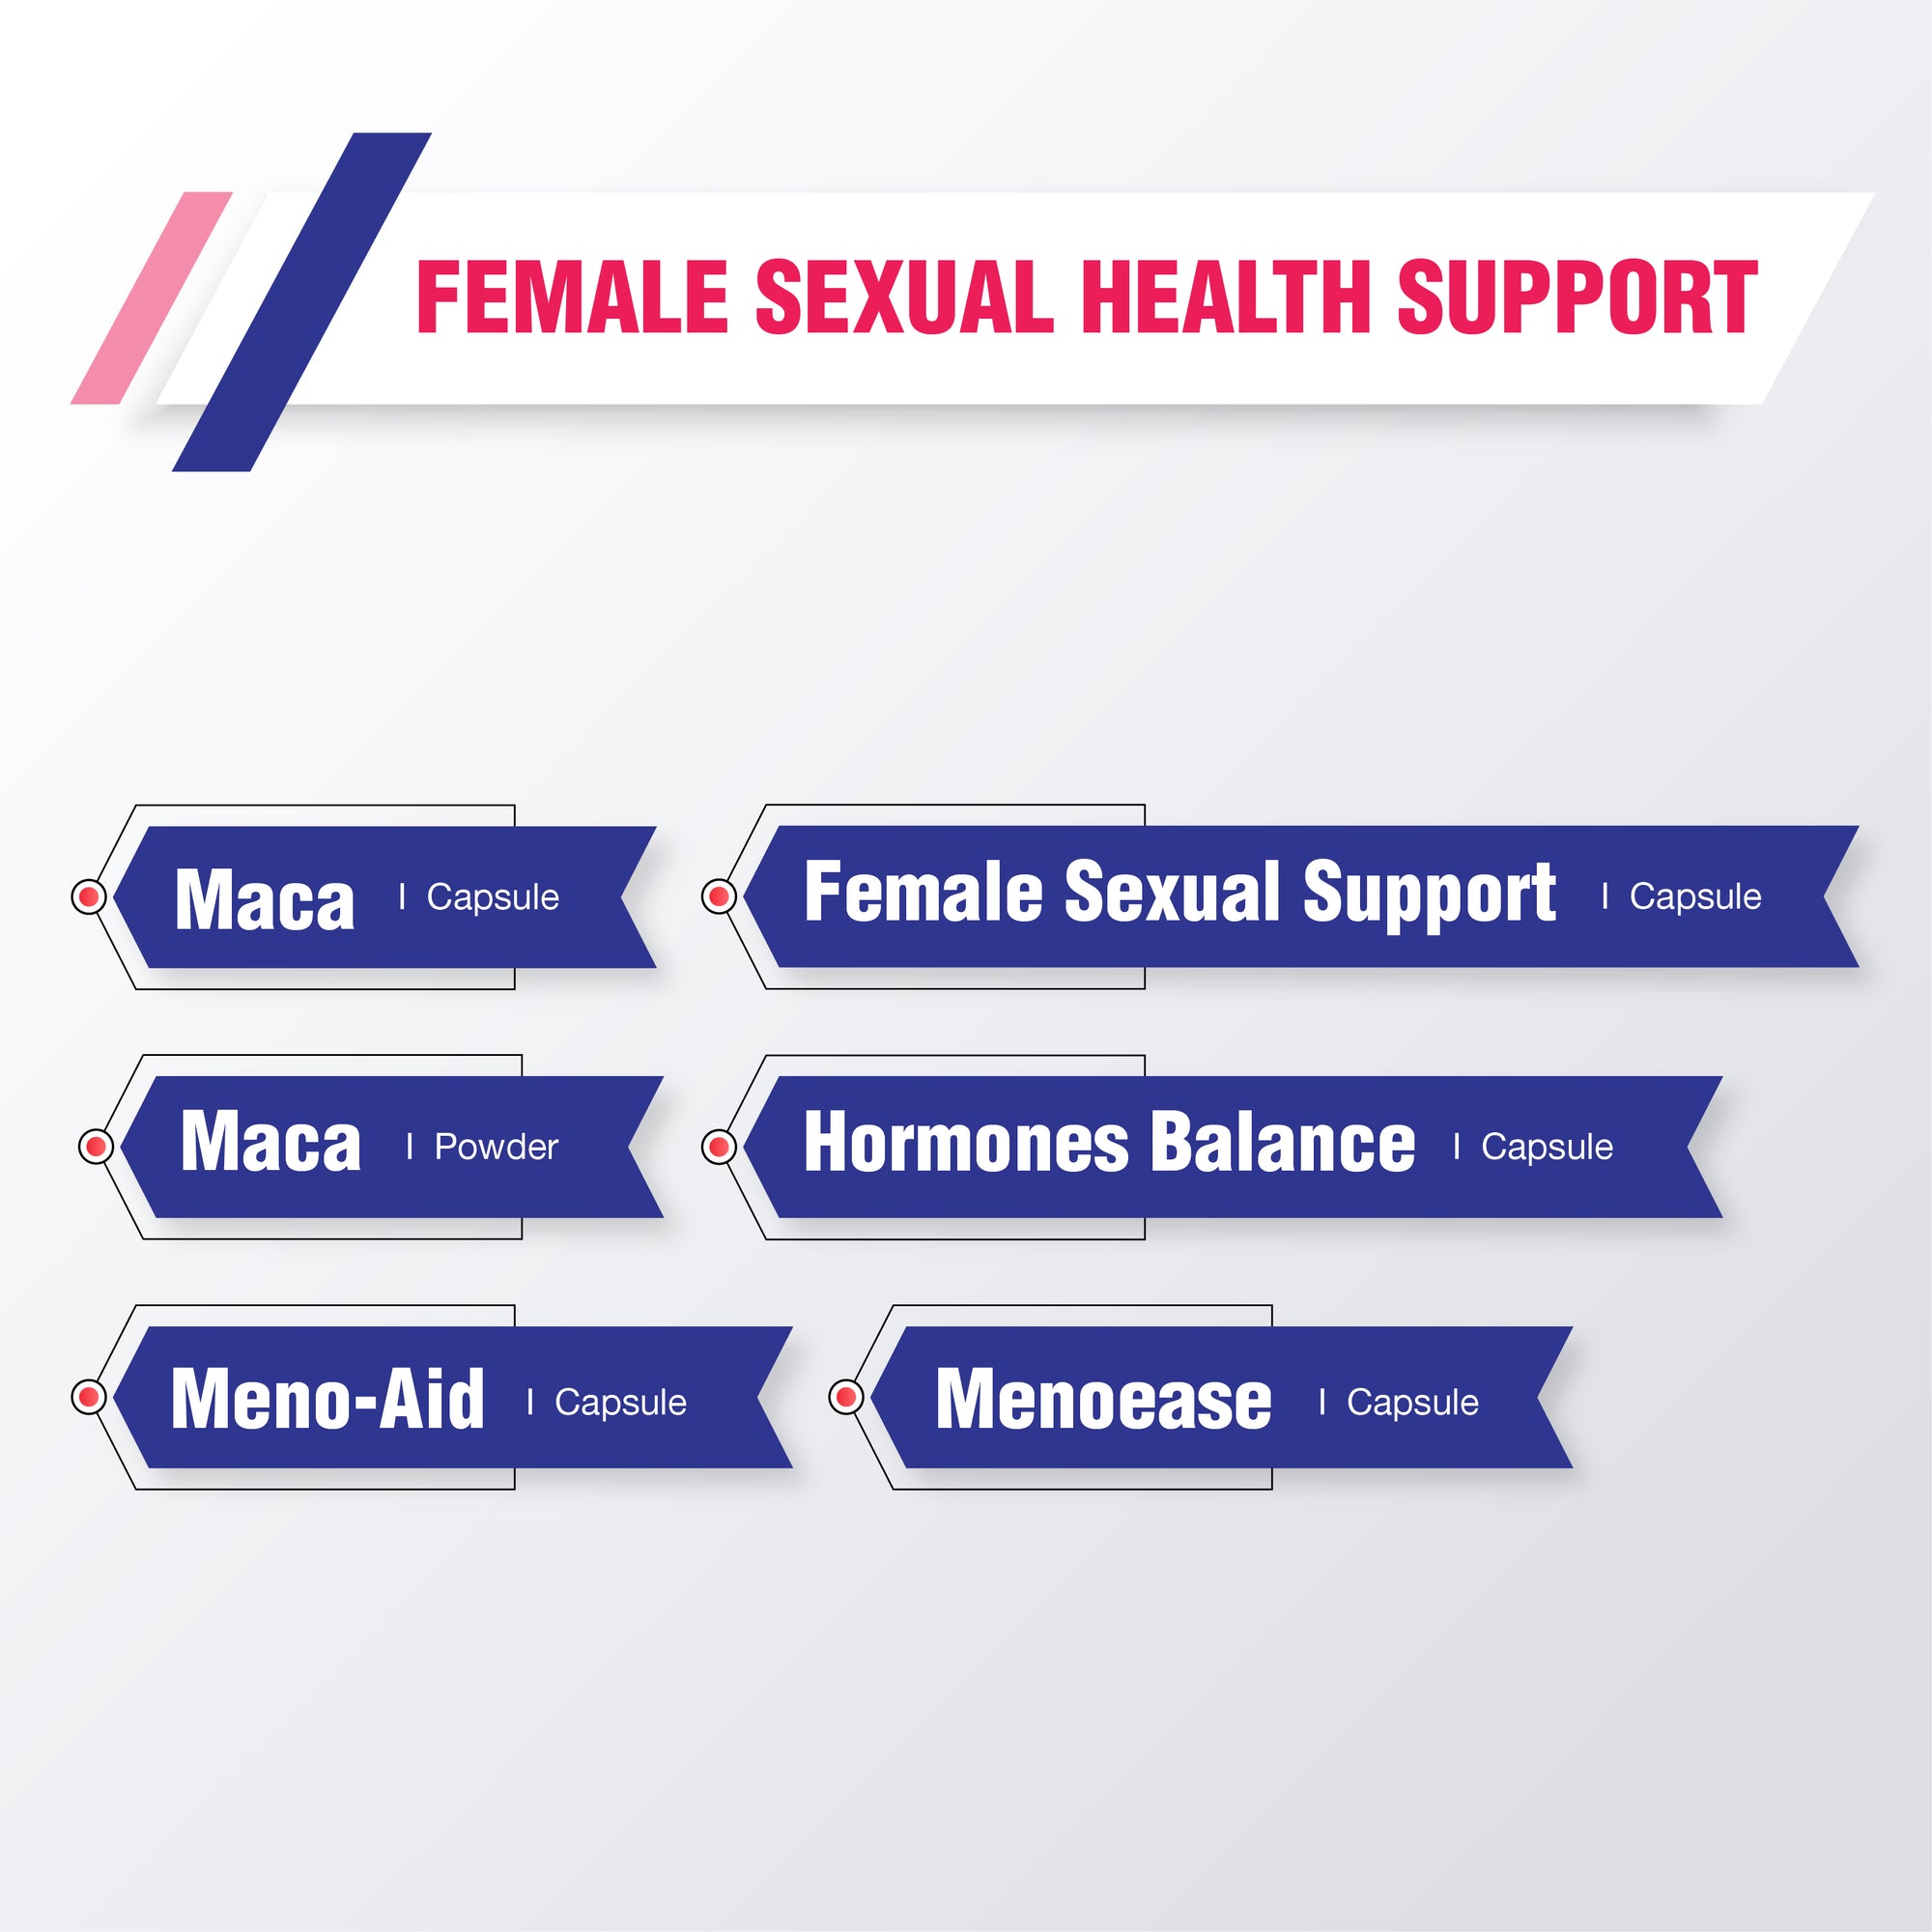 Female sexual health support